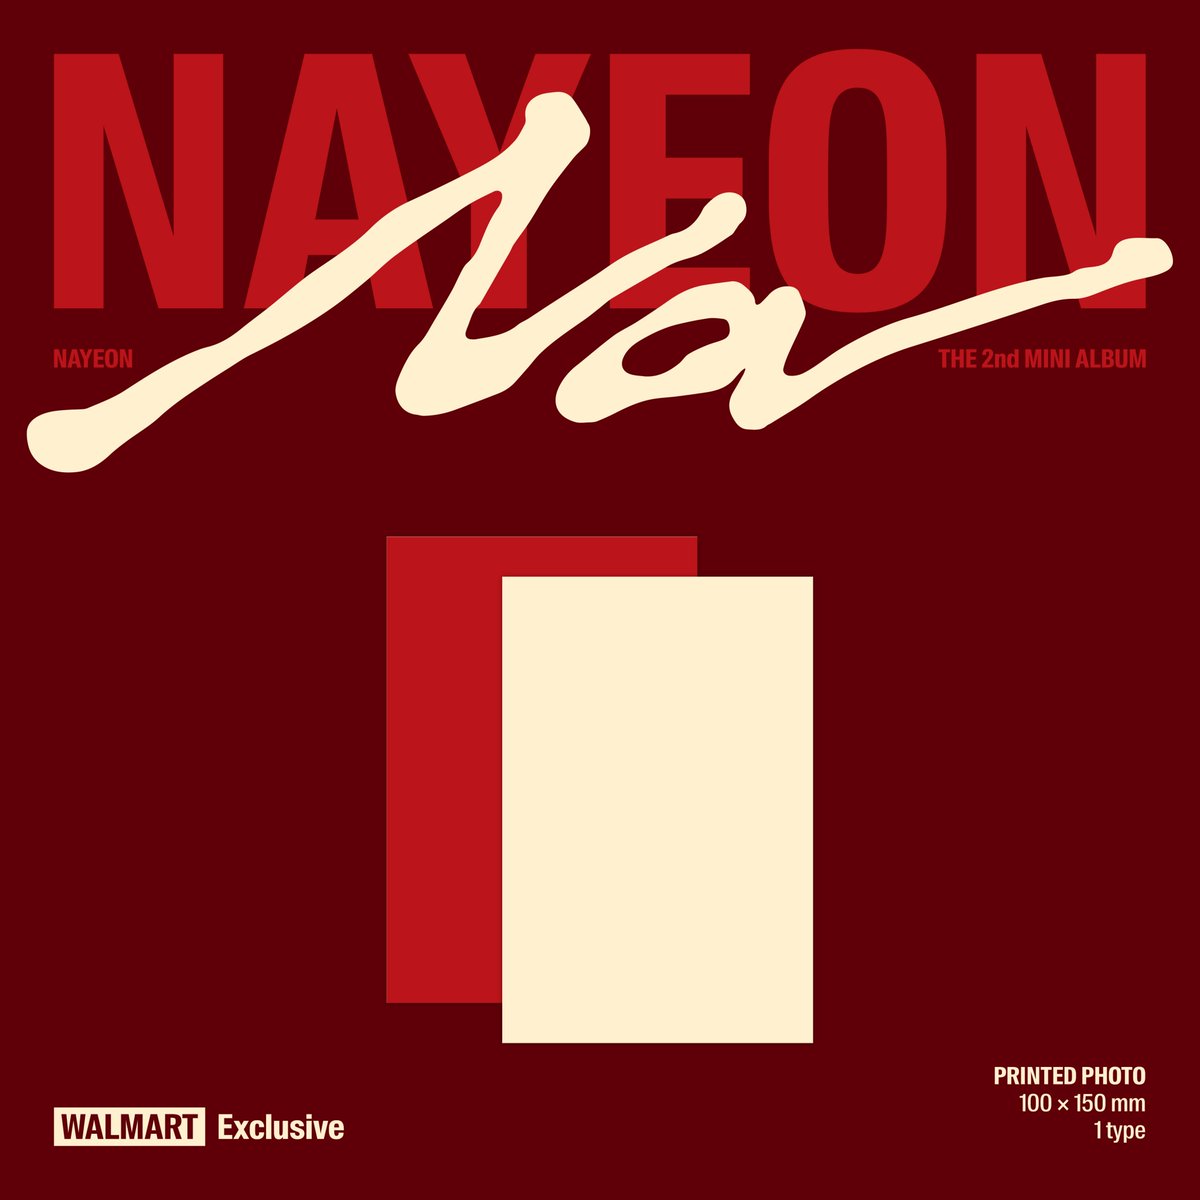 NAYEON THE 2nd MINI ALBUM 〖NA〗 🔔Physical Pre-Order 🔗Walmart (w/Exclusive Printed Photo) ‘A’ ver.: NAYEON.lnk.to/NAYEON_NA/Walm… ‘B’ ver.: NAYEON.lnk.to/NAYEON_NA/Walm… ‘C’ ver.: NAYEON.lnk.to/NAYEON_NA/Walm… ✰ 〖NA〗 Pre-Save & Pre-Order ✰ NAYEON.lnk.to/NAYEON_NA ➮ Release on…